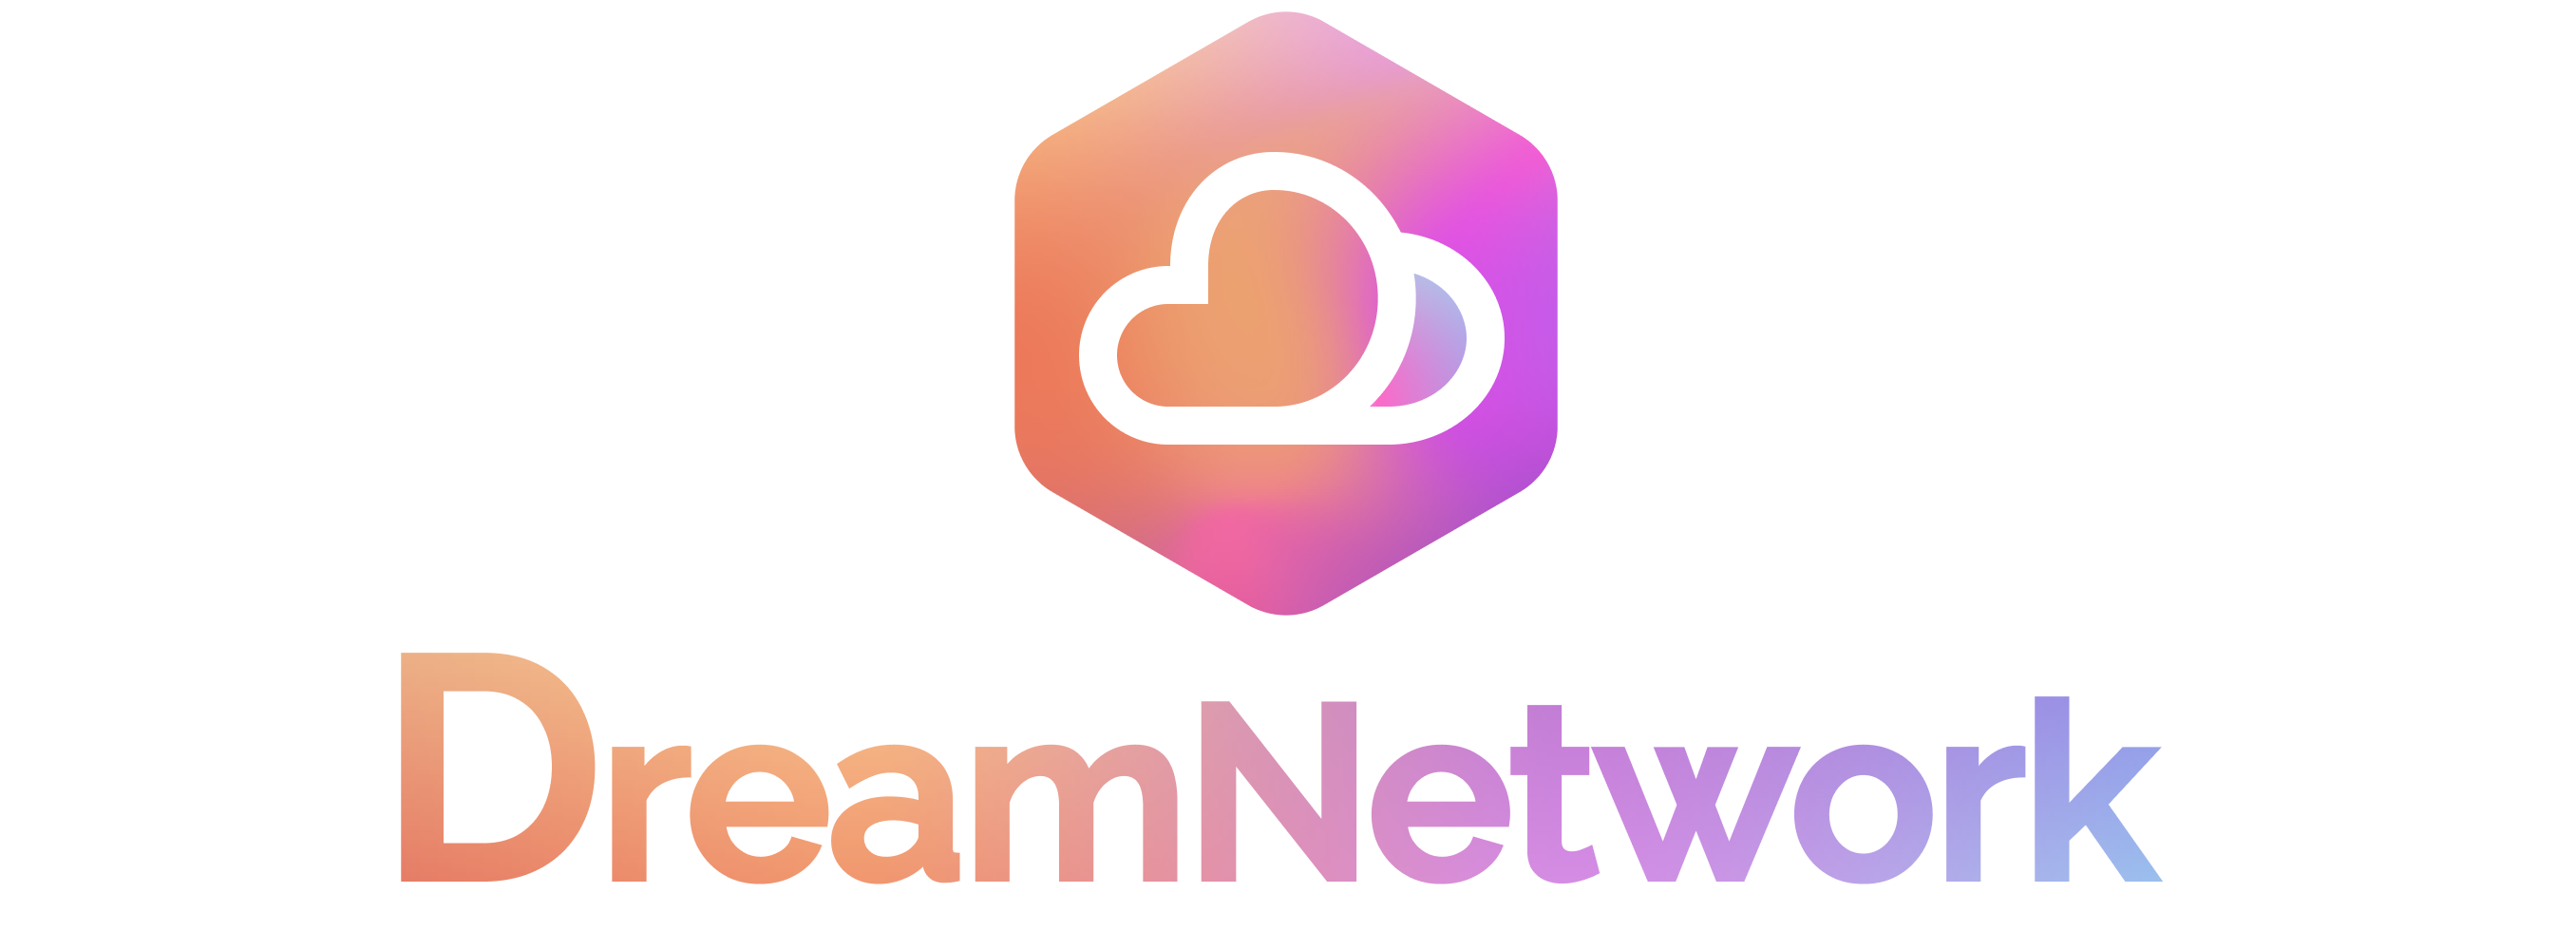 The DreamNetwork's Cloud Logo with a title (DreamNetwork)